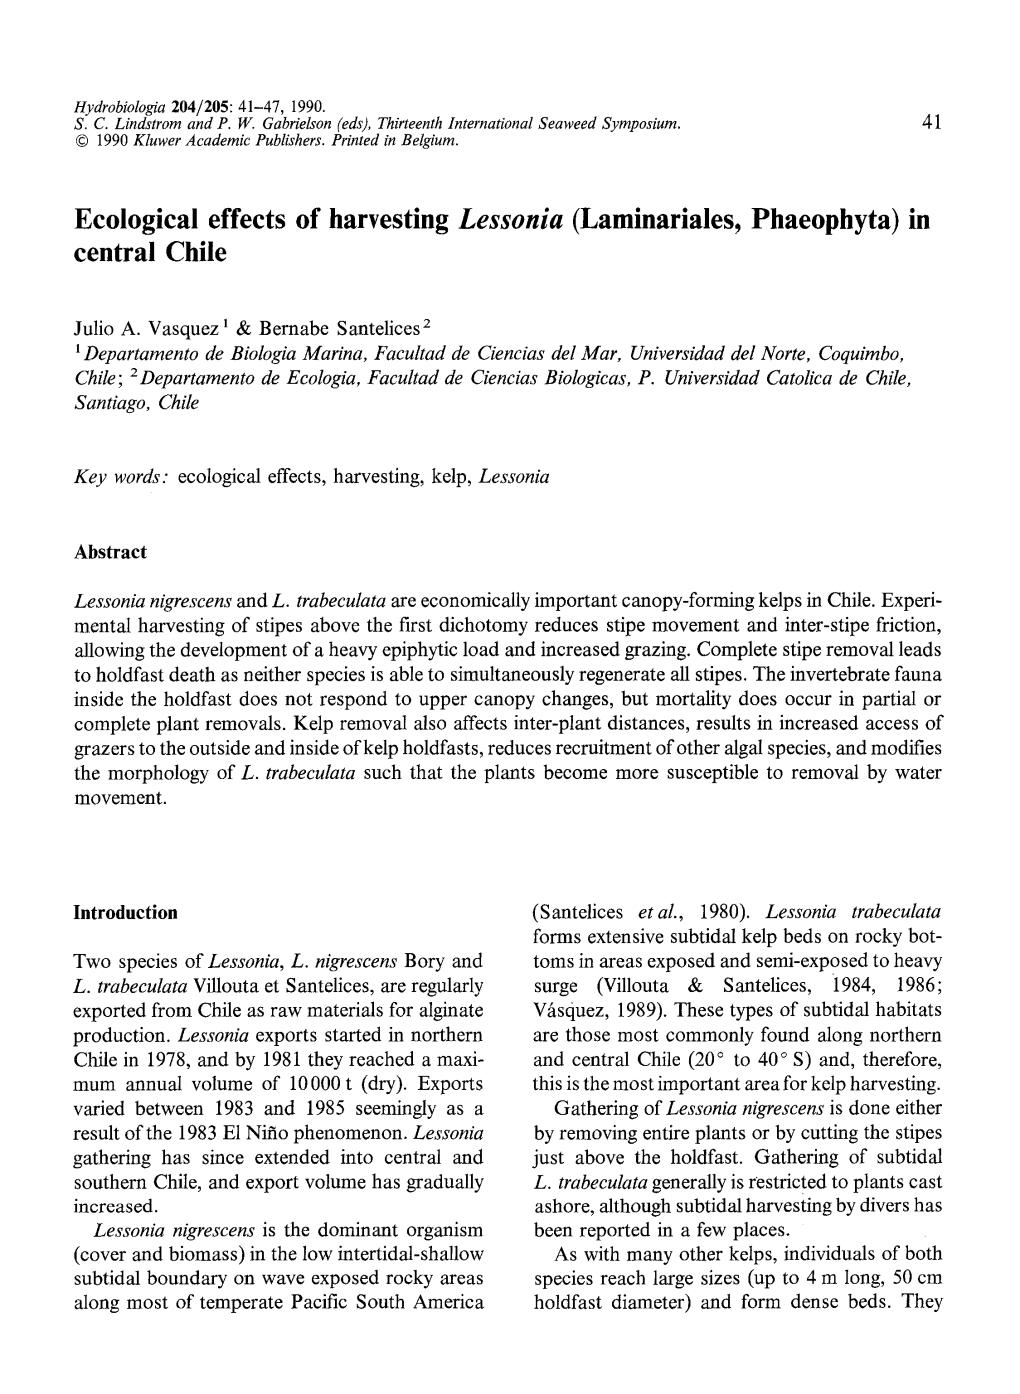 Ecological Effects of Harvesting &lt;Emphasis Type="Italic"&gt;Lessonia